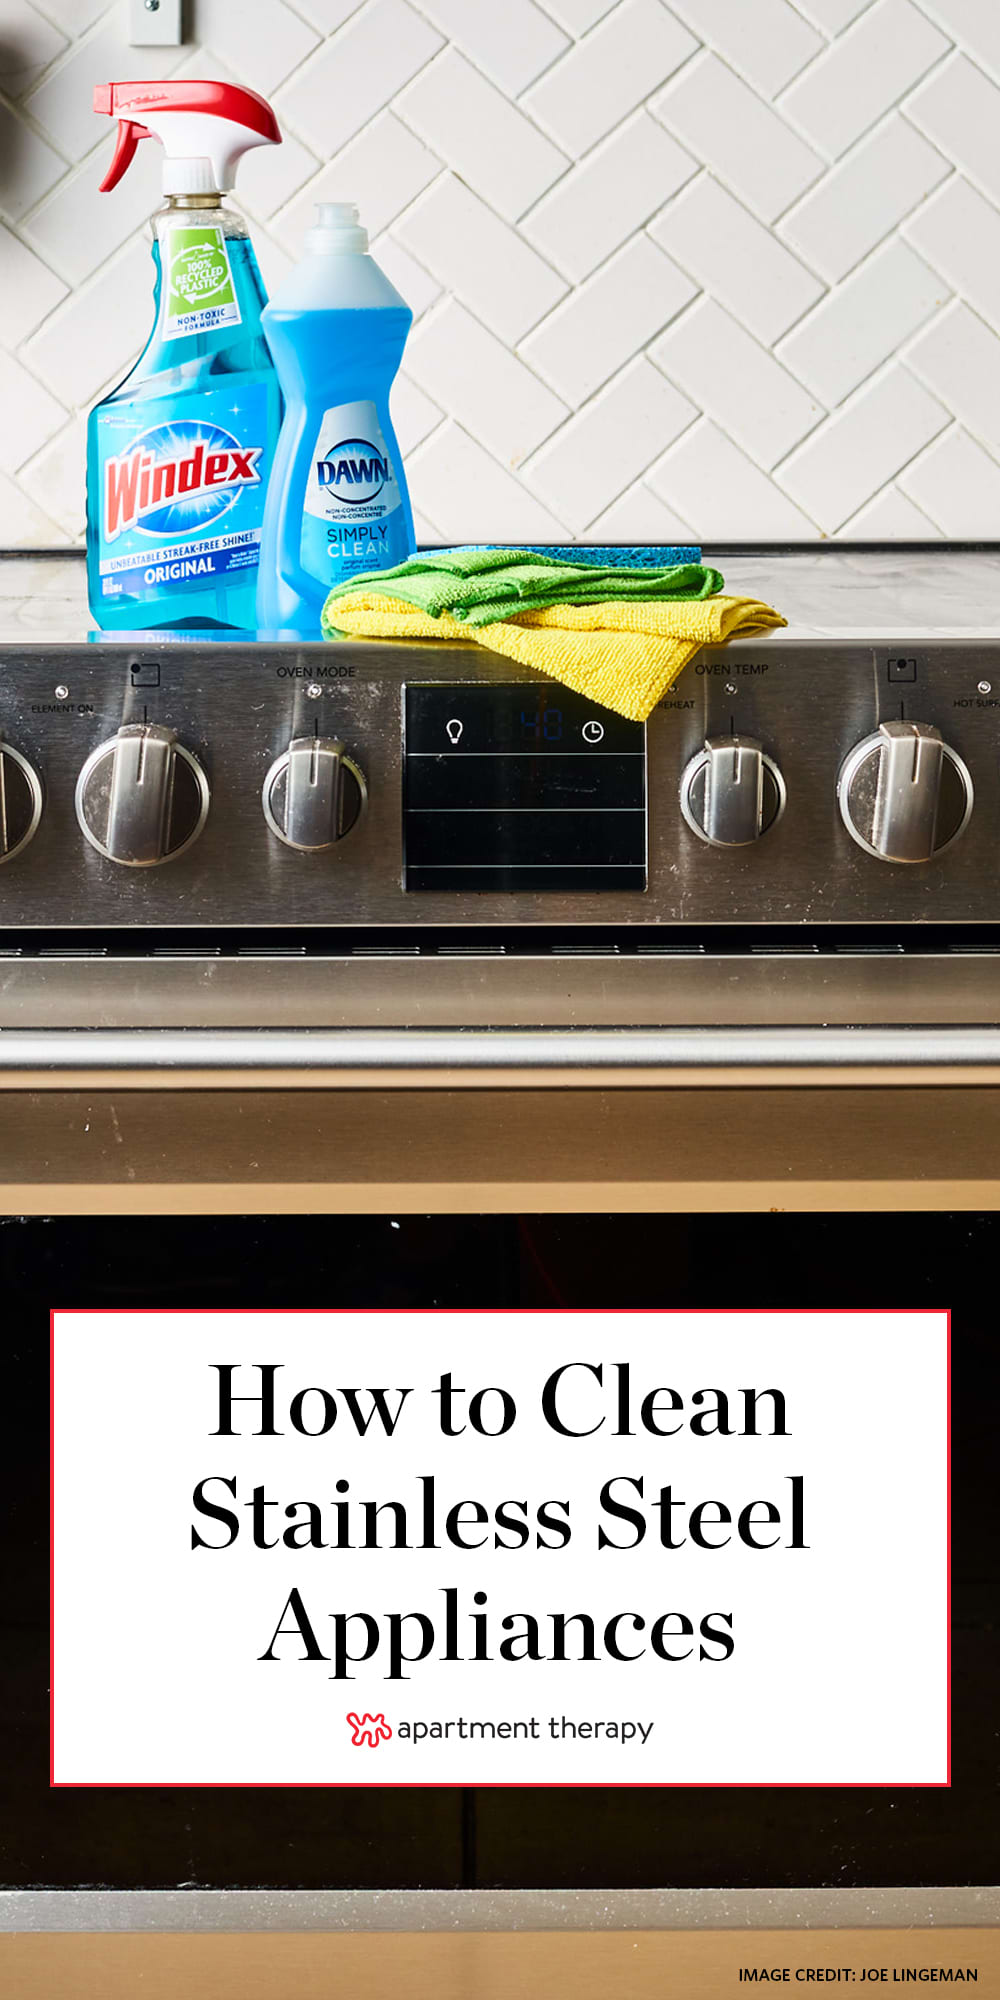 How to Clean Stainless Steel Appliances - DIY Stainless Steel Cleaning  Methods